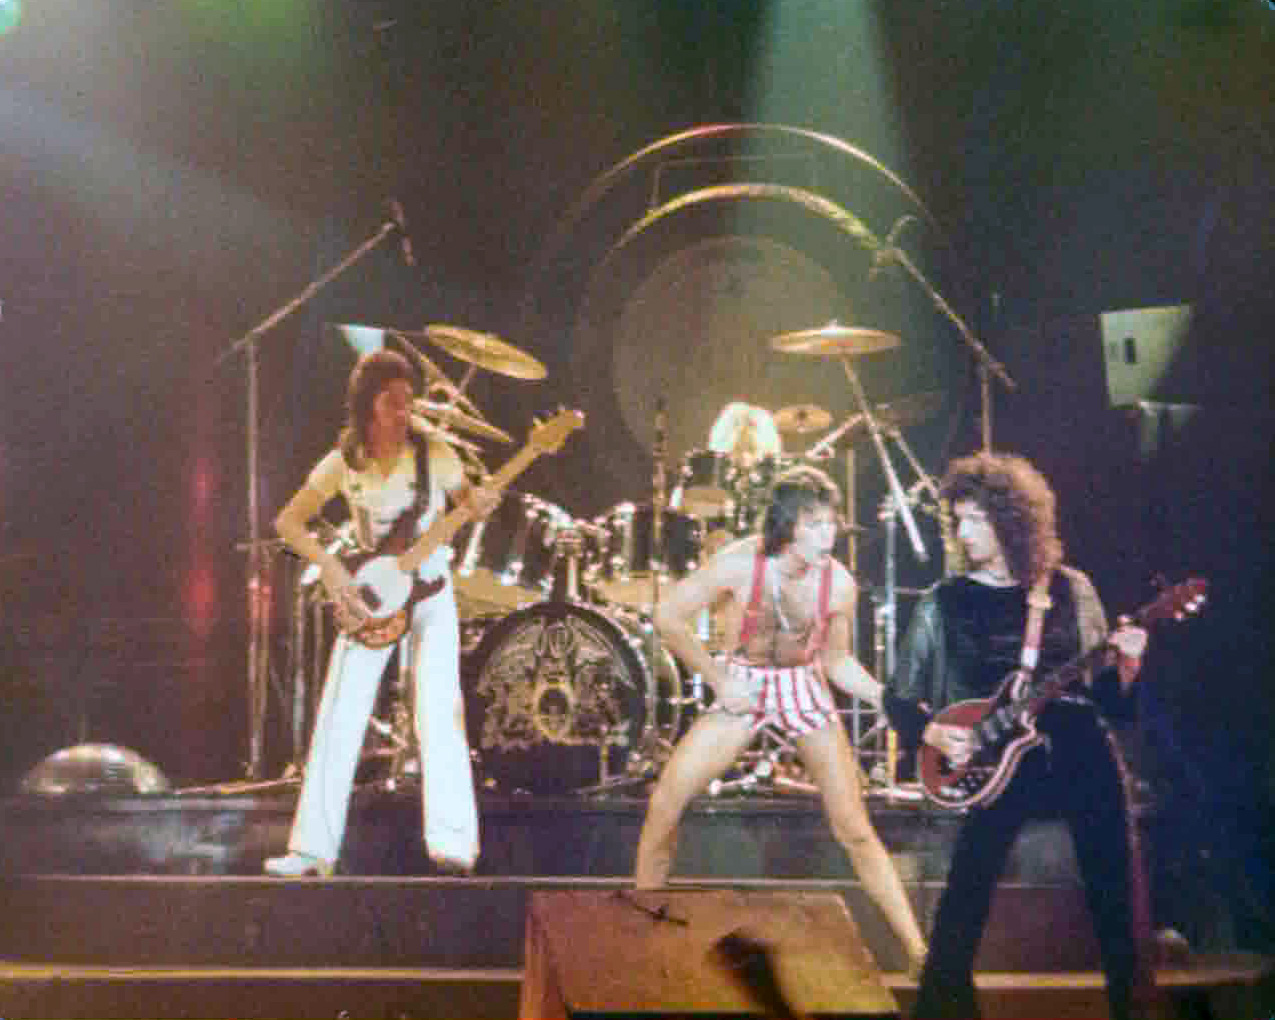 queen north american tour 1977